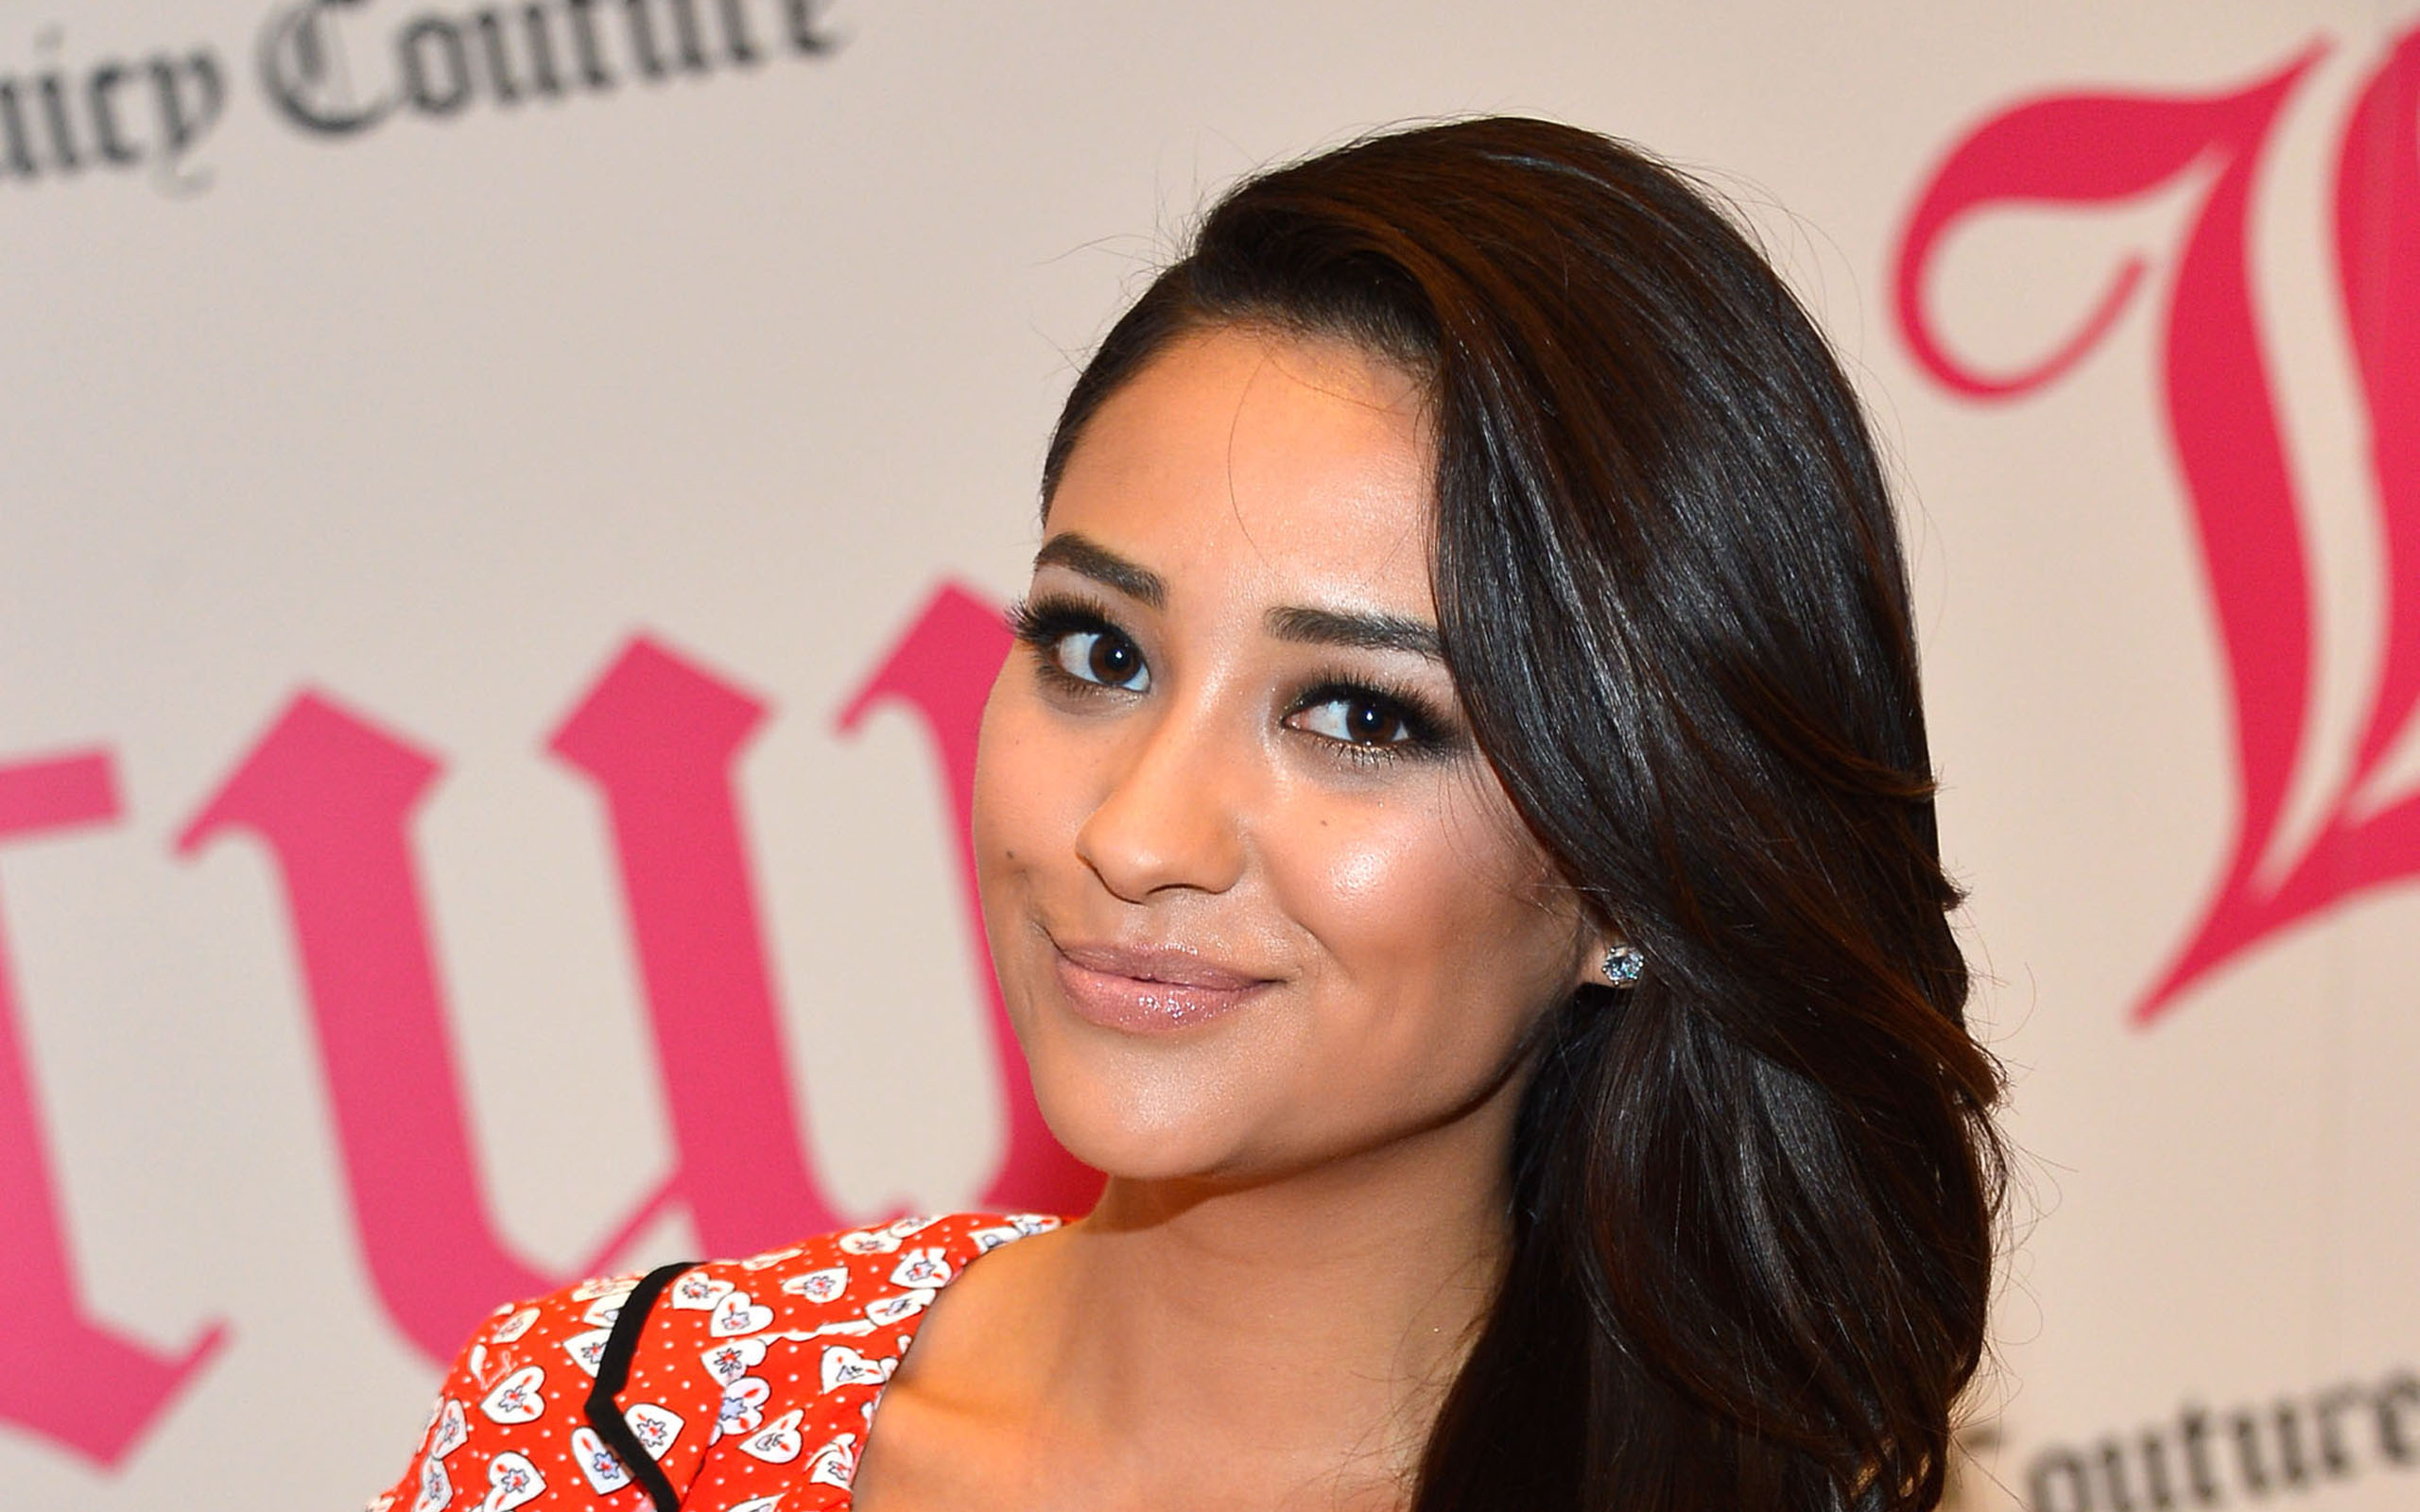 celebrity, shay mitchell, actress, canadian